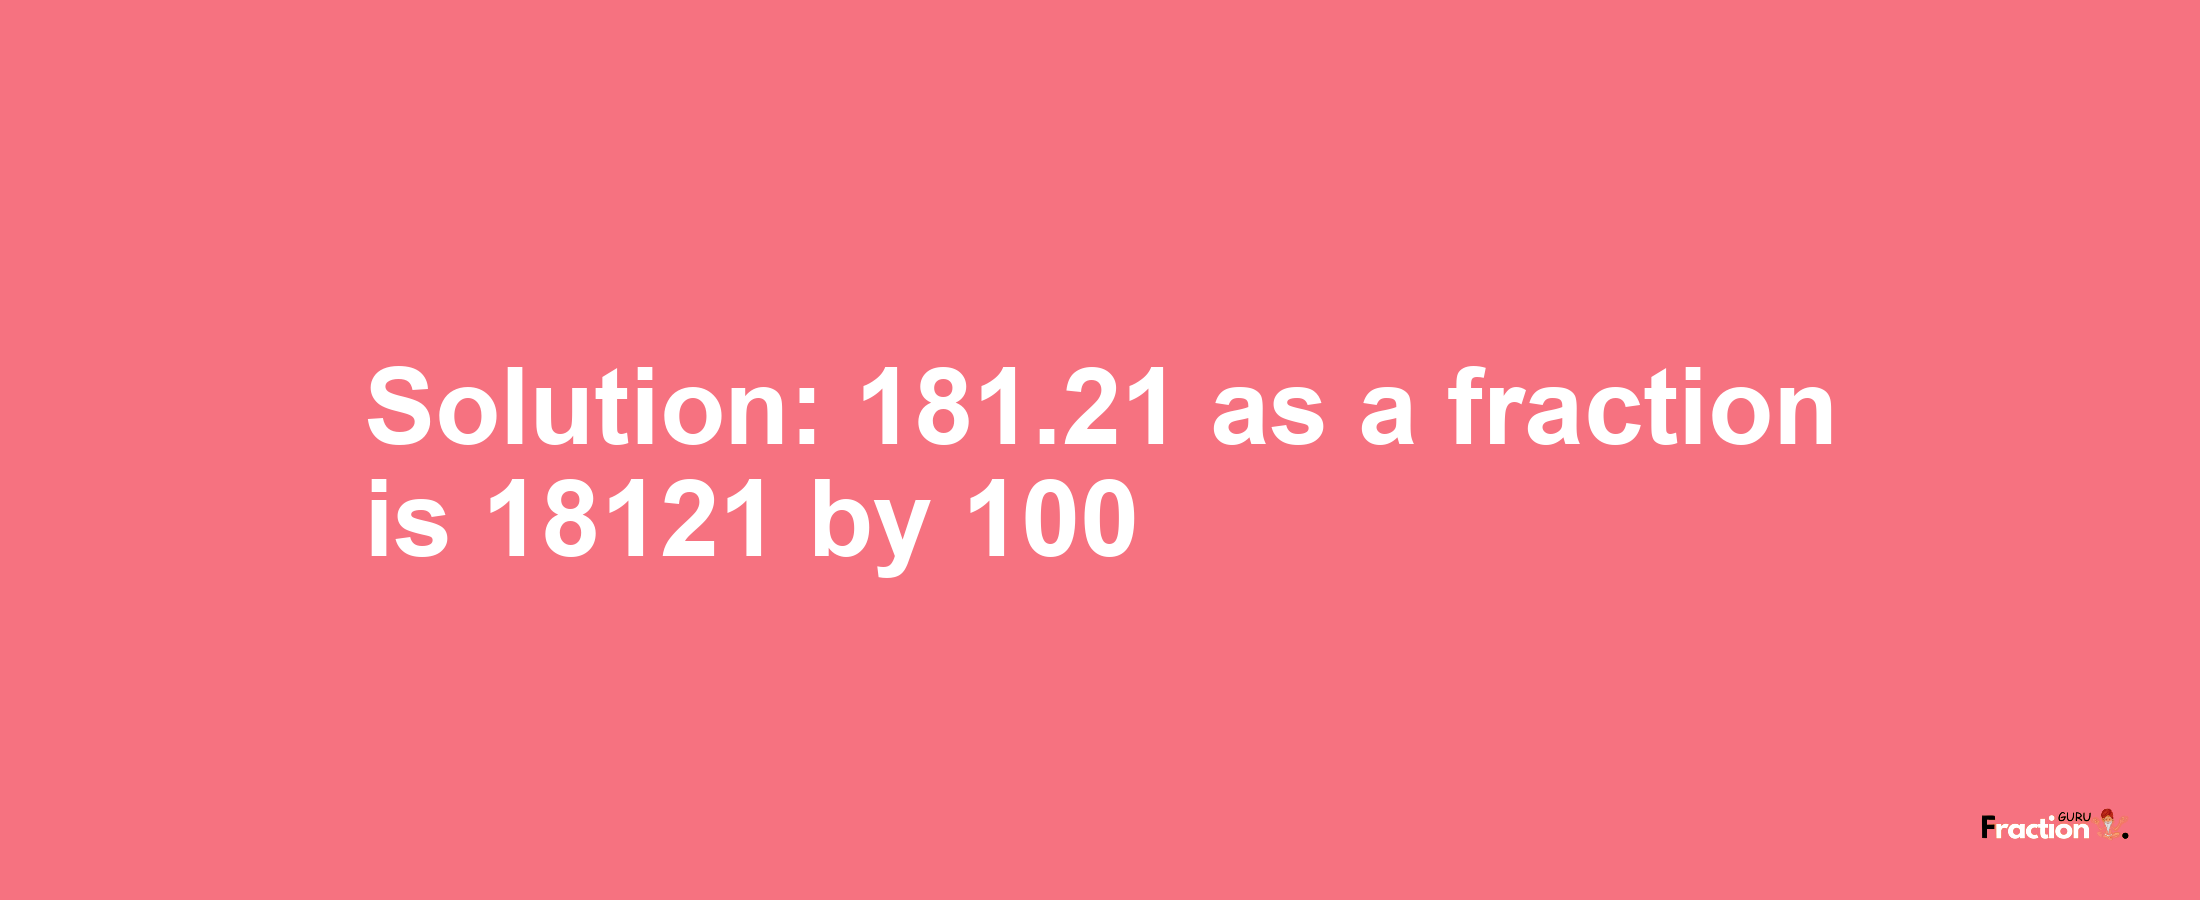 Solution:181.21 as a fraction is 18121/100